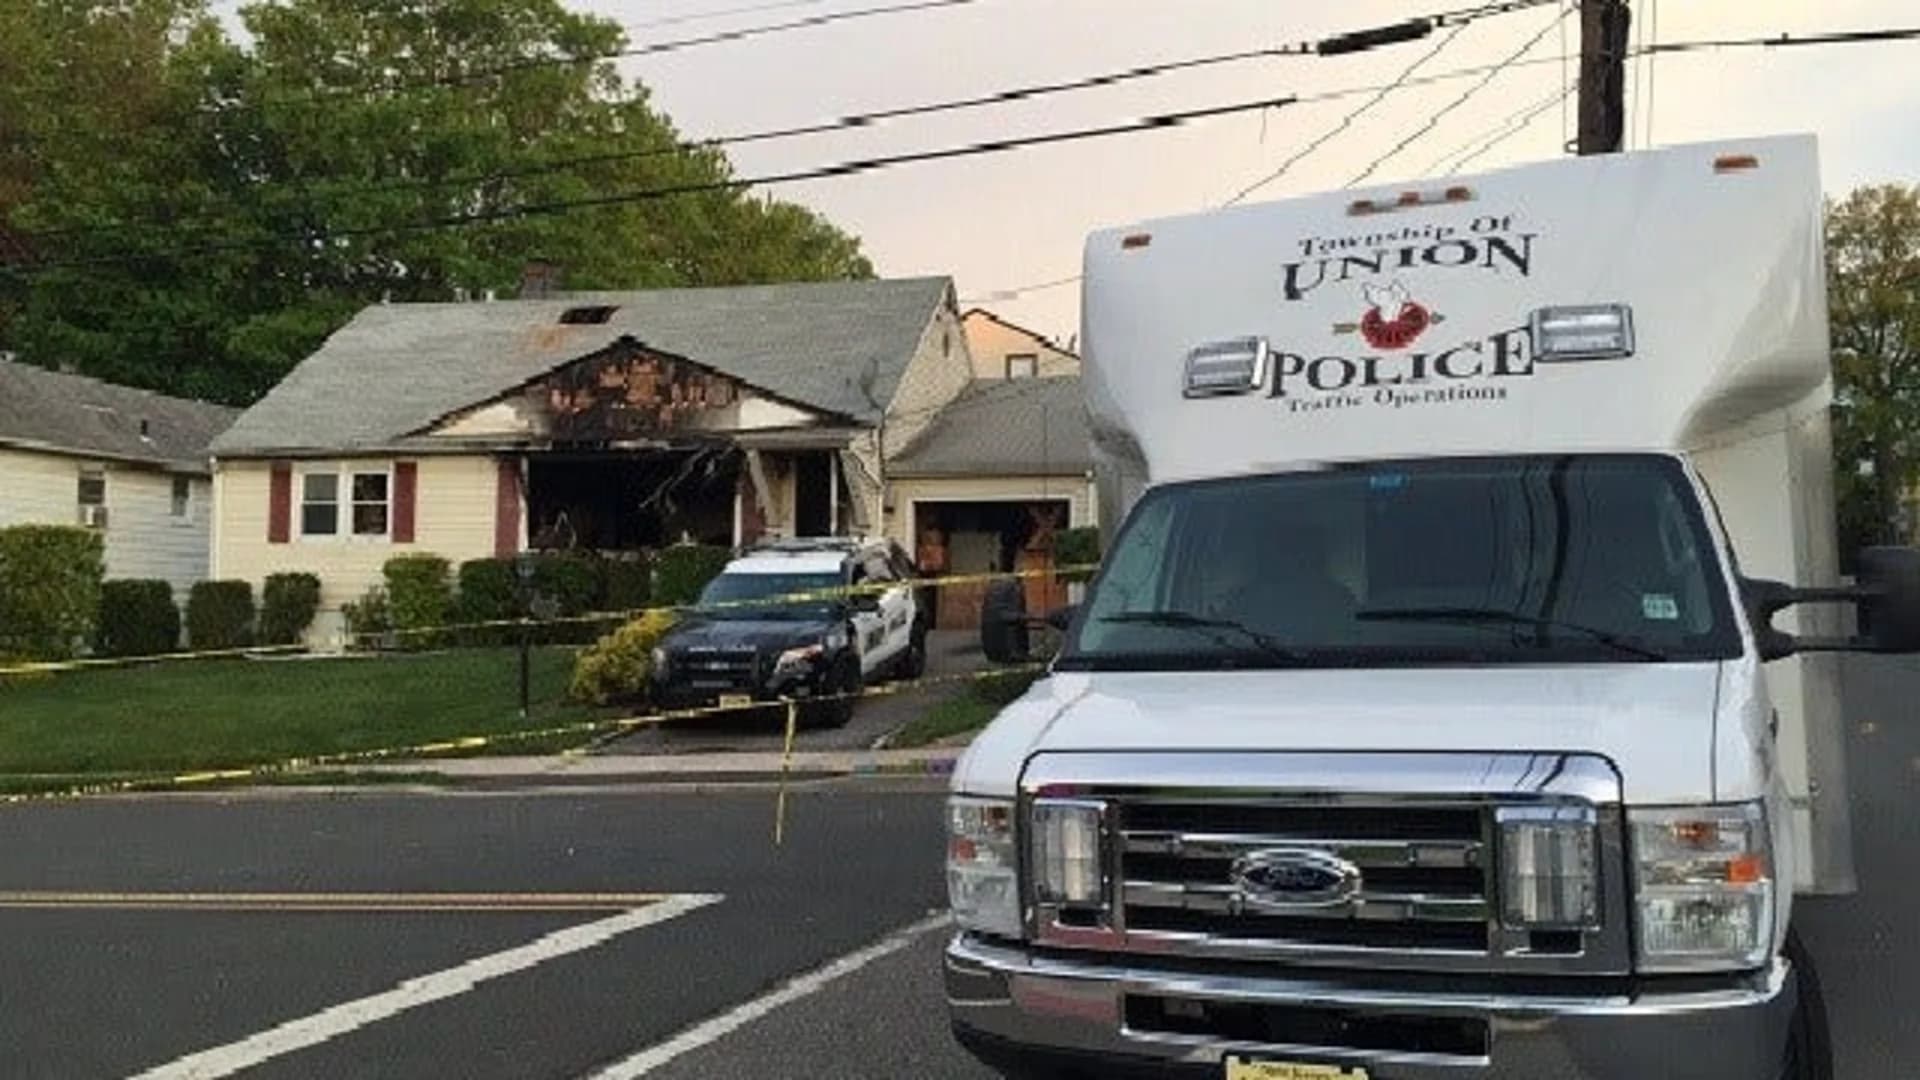 Union County Prosecutor: Son stabbed man found dead in burning home